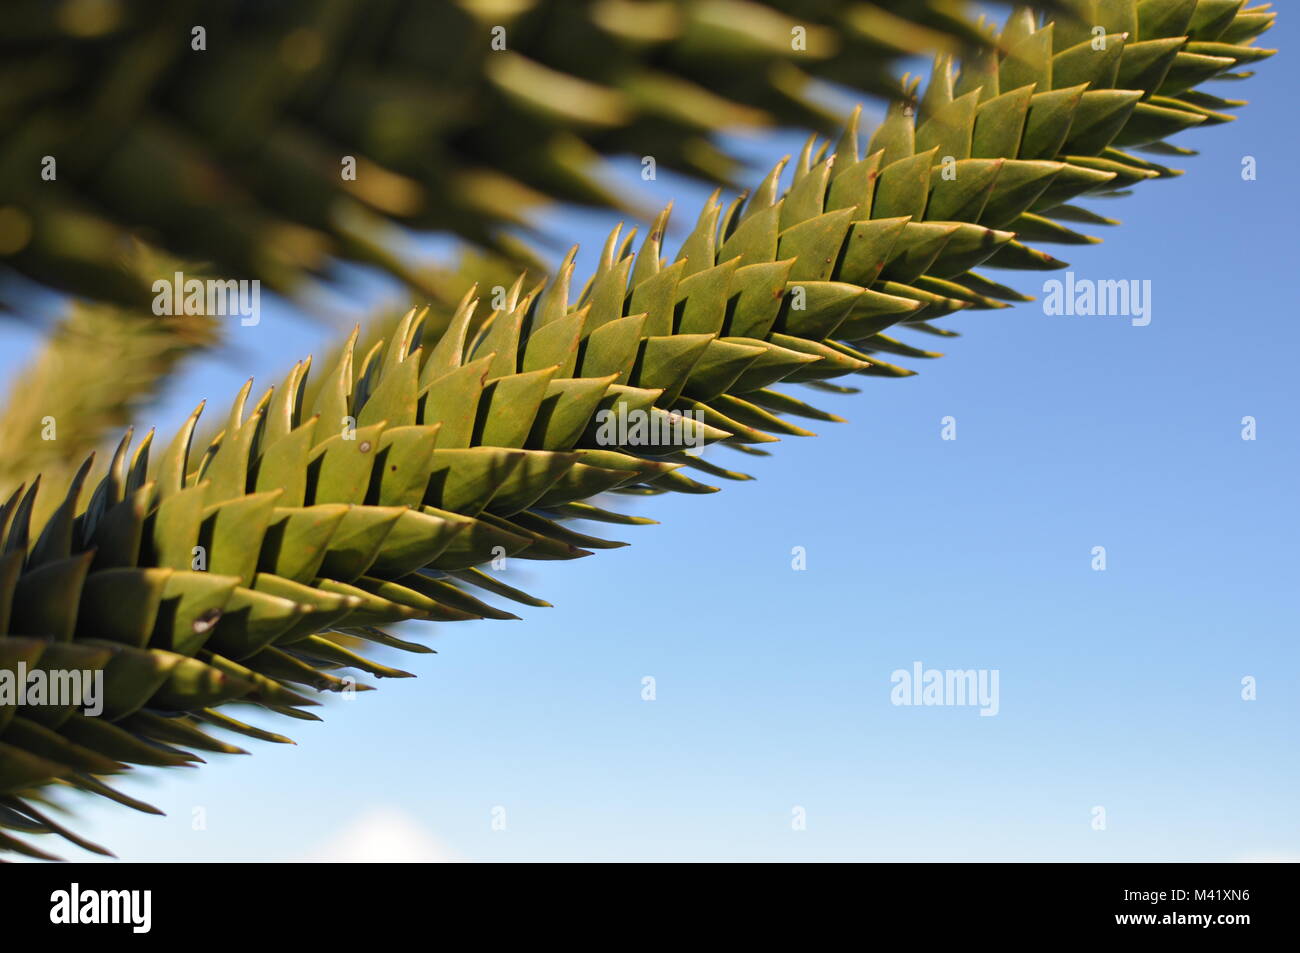 A close-up of the detail of the leaves on a monkey puzzle tree branch in front of a blue sky background Stock Photo